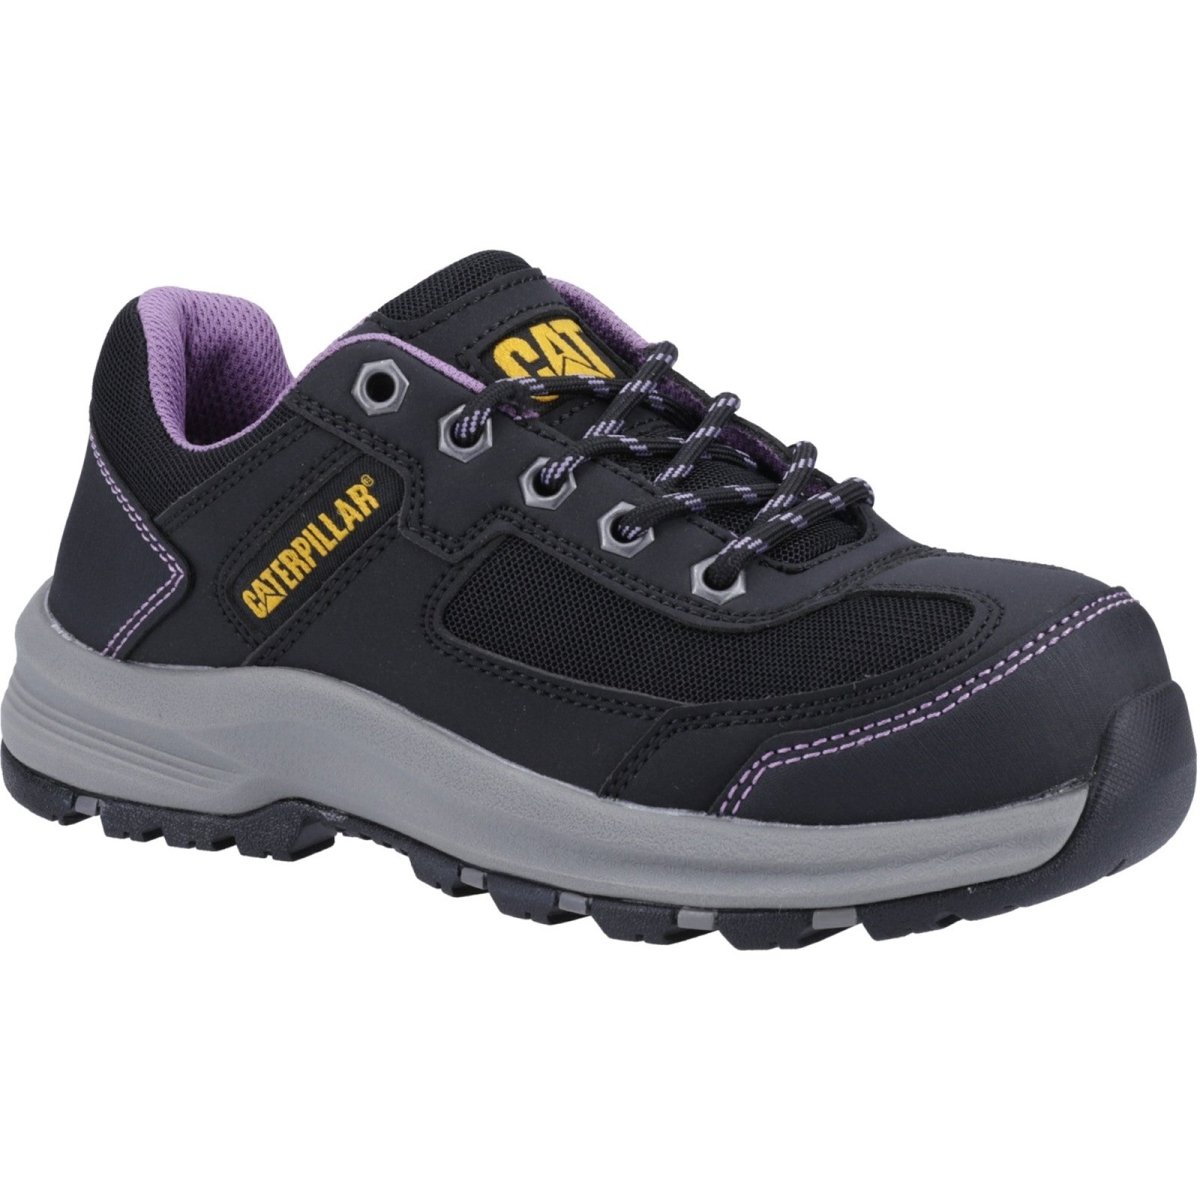 Caterpillar Elmore Ladies Steel Toe Work Safety Shoes - Shoe Store Direct